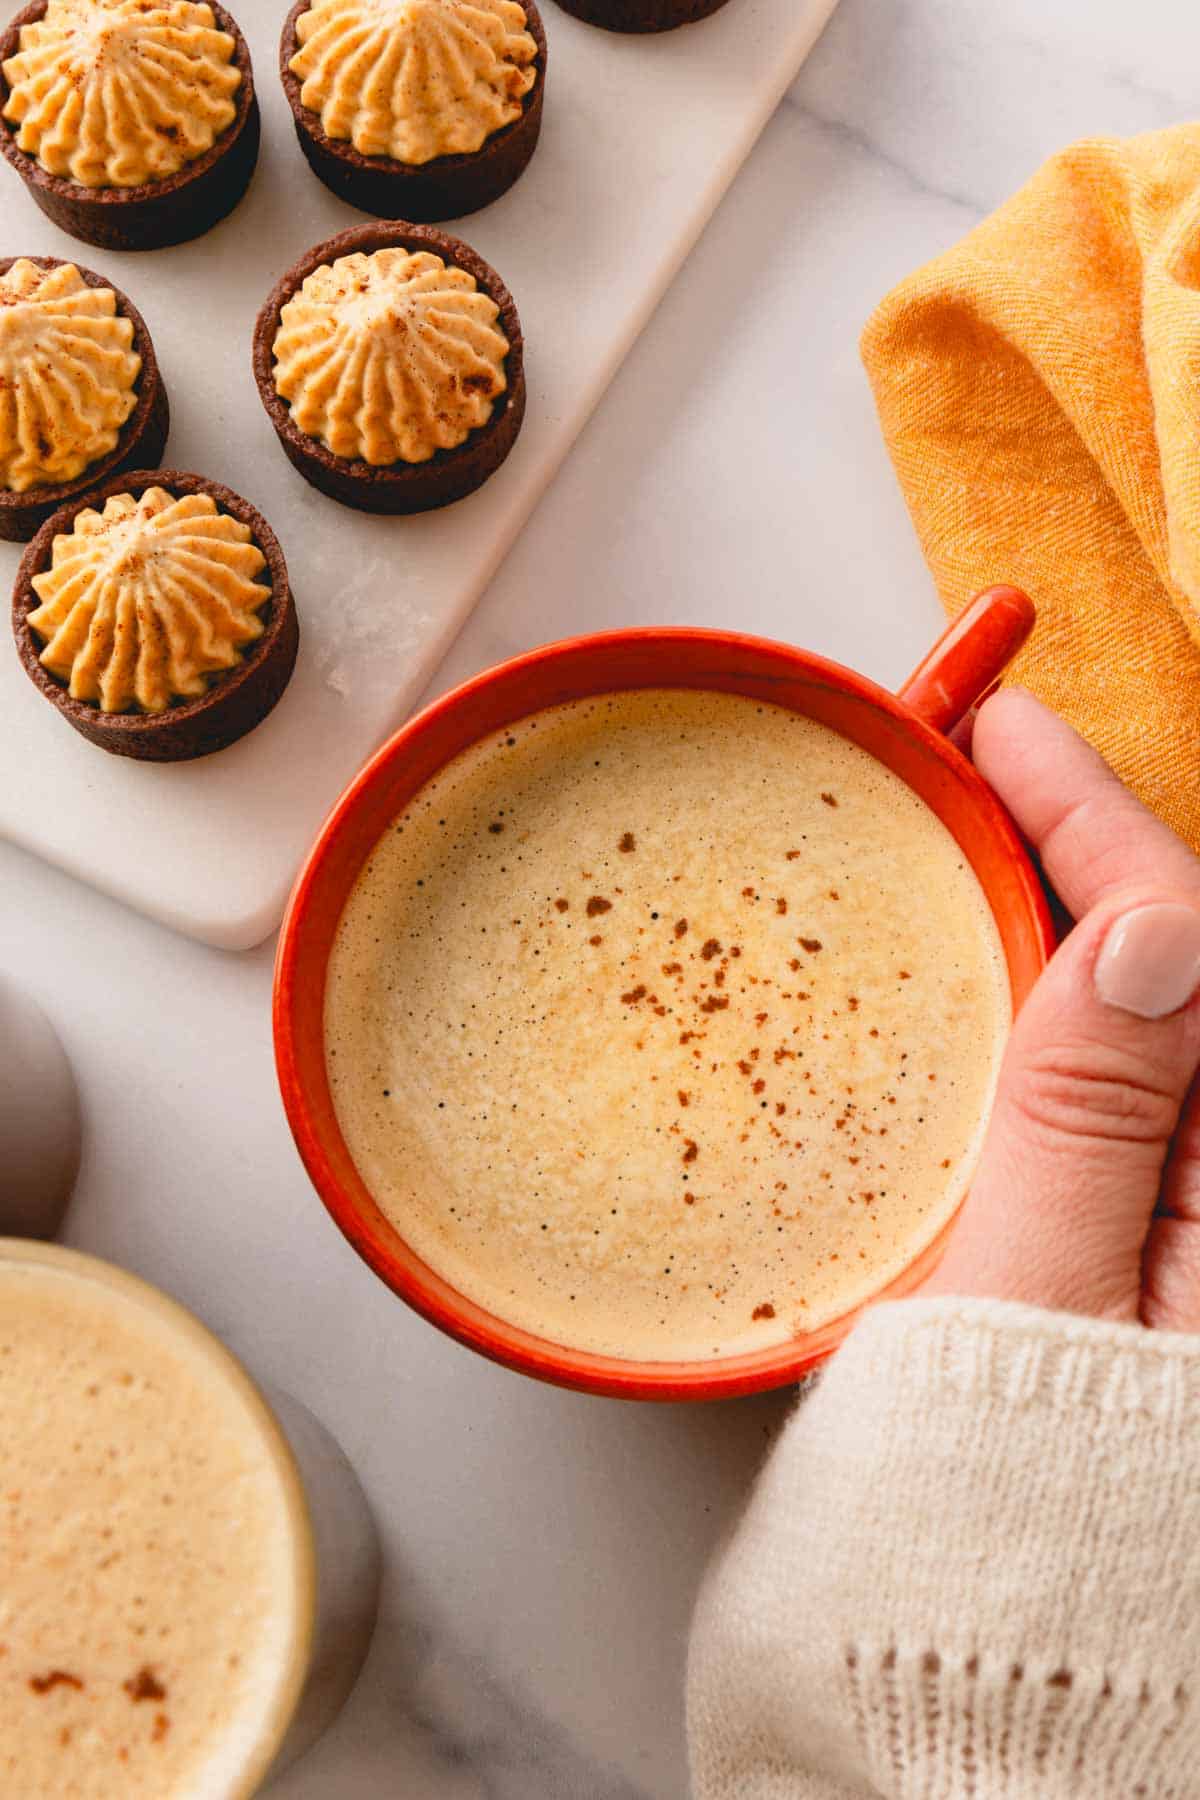 A hand holding a mug of pumpkin coffee next to chocolate cups filled with pumpkin mousse.